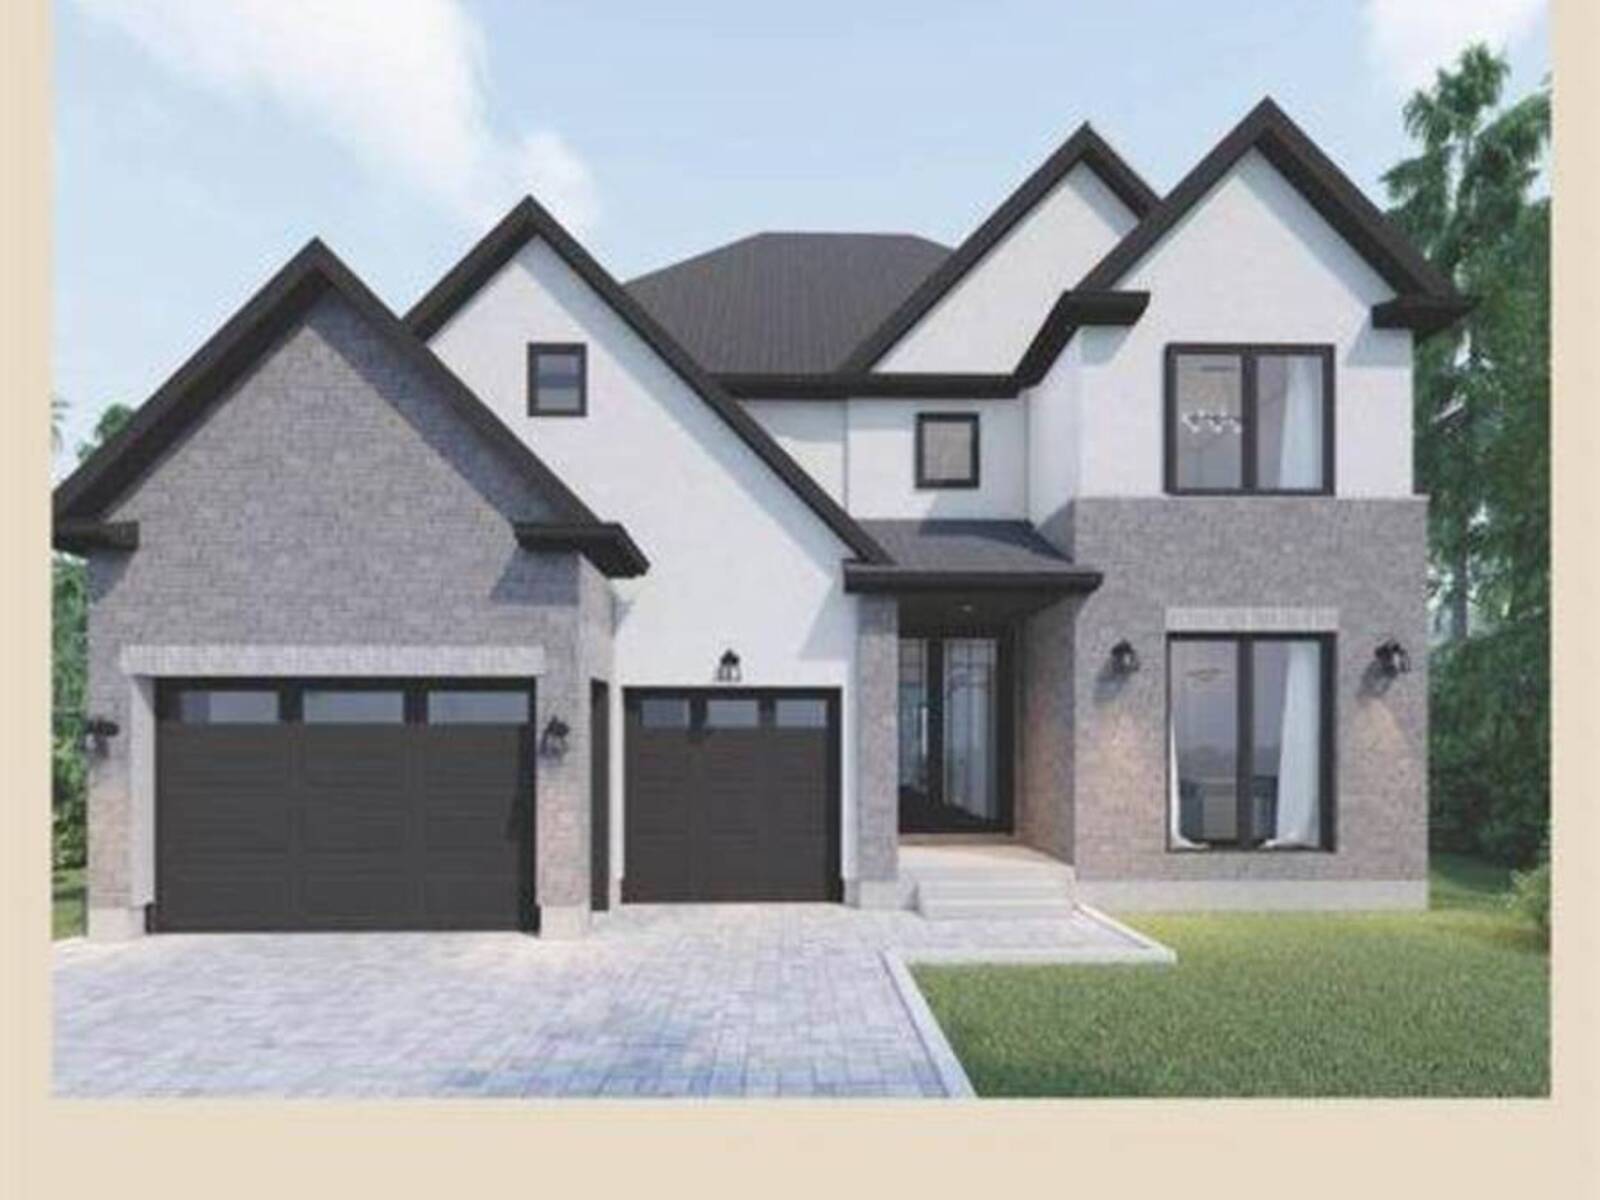 LOT 8 SASS CRESCENT, Brant, Ontario N3L 0A9